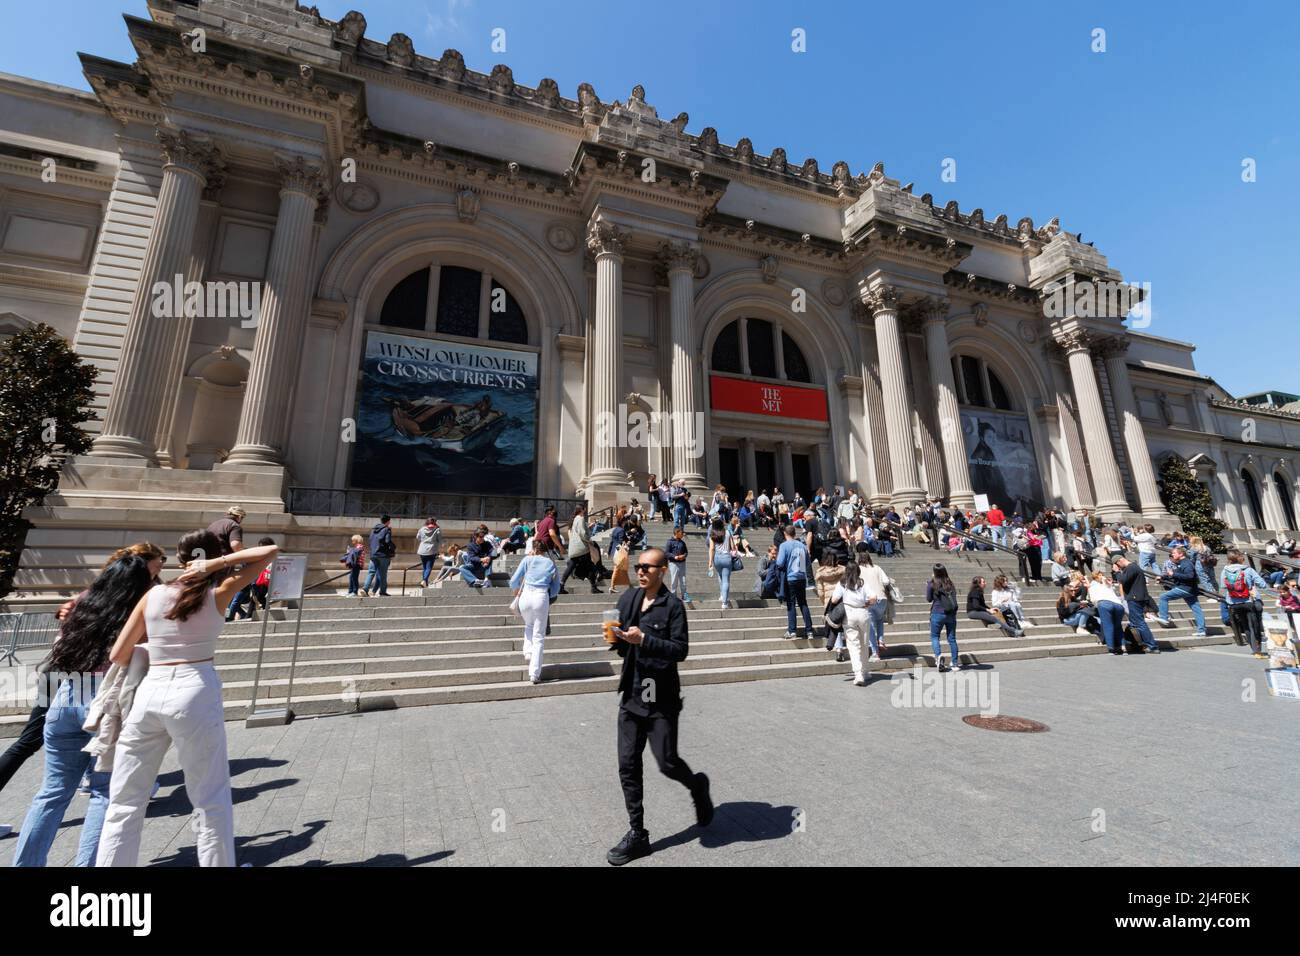 People walk and sit around the grand staircase entrance to the Metropolitan Museum of Art on fifth avenue on a beautiful Spring day Stock Photo